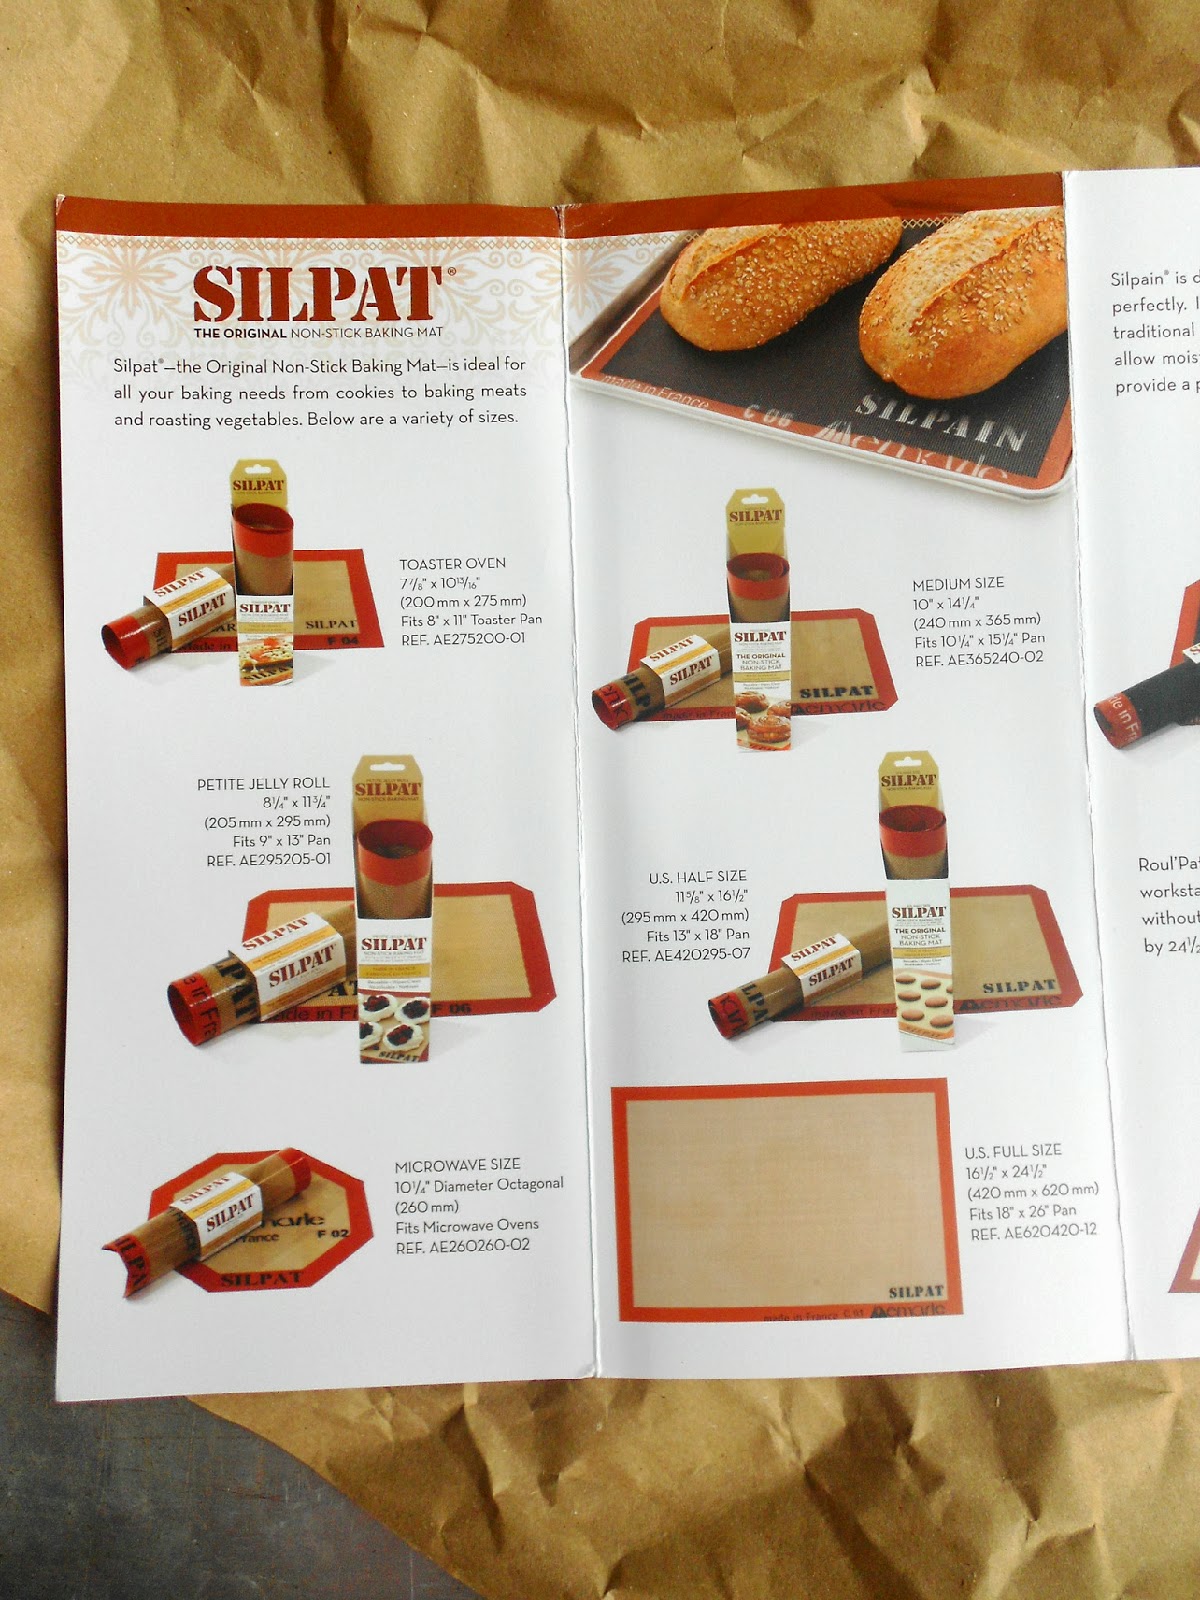 Silpat Makes One of the Best Silicone Baking Mats